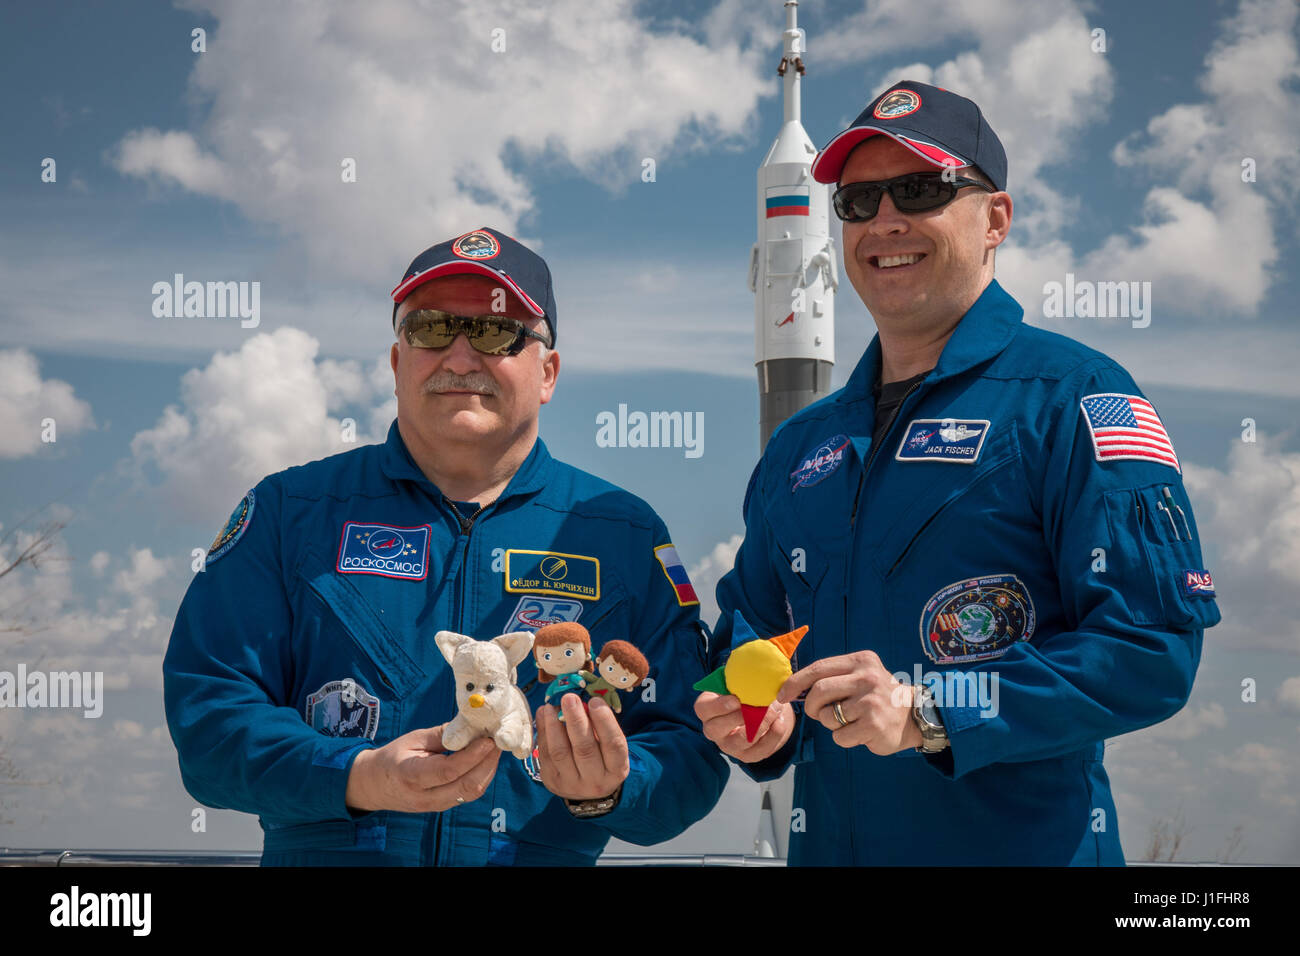 NASA International Space Station Expedition 51 Soyuz MS-04 mission prime crew members Russian cosmonaut Fyodor Yurchikhin of Roscosmos (left) and American astronaut Jack Fischer hold up commemorative items that will be used as mascot indicators over their heads during the launch and ascent at the Cosmonaut Hotel April 13, 2017 in Baikonur, Kazakhstan. Yurchikhin is holding toys from his children and Fischer holds an emblem of the MD Anderson Cancer Center where his daughter was treated.       (photo by Victor Zelentsov /NASA   via Planetpix) Stock Photo